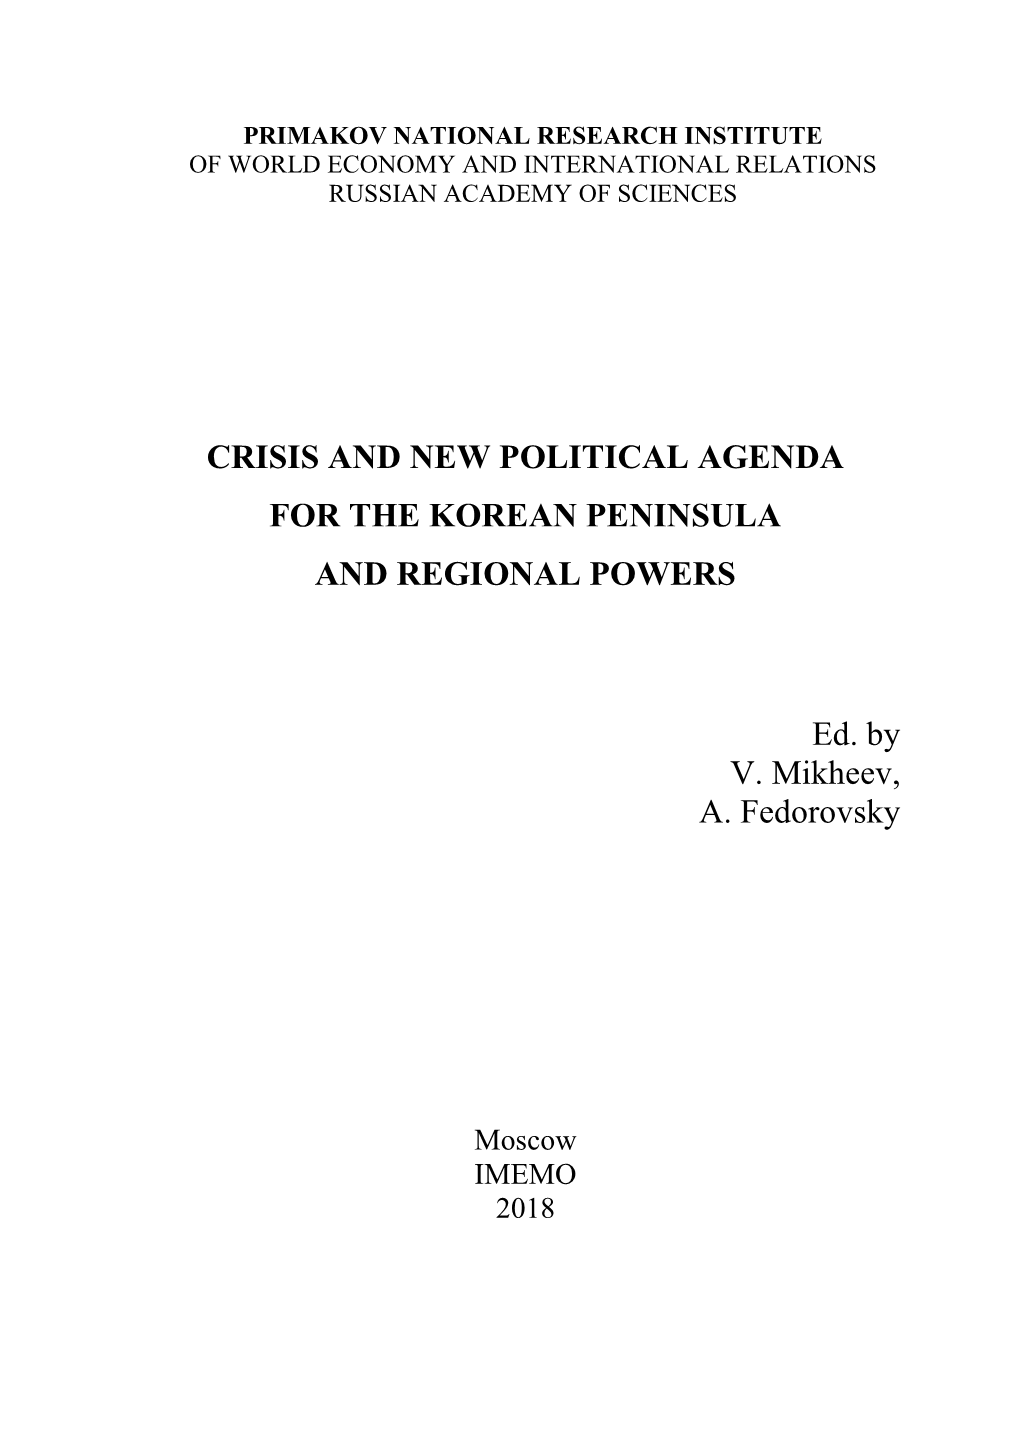 Crisis and New Political Agenda for the Korean Peninsula and the Regional Powers/ V